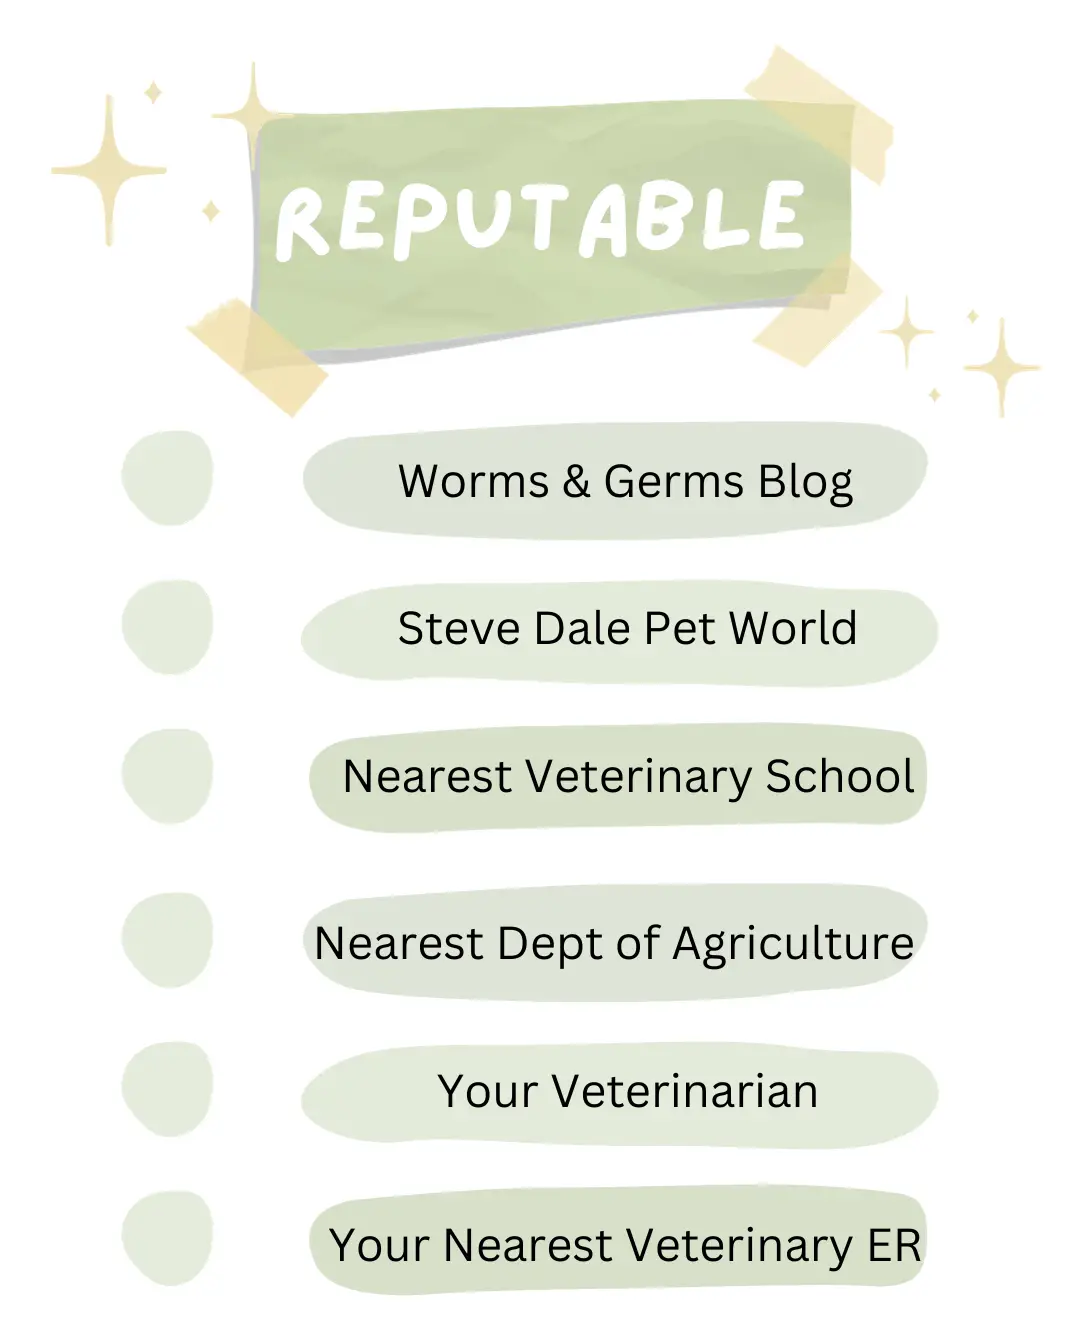 Canine Infectious Respiratory Disease Complex graphic 1 - list of reputable resources